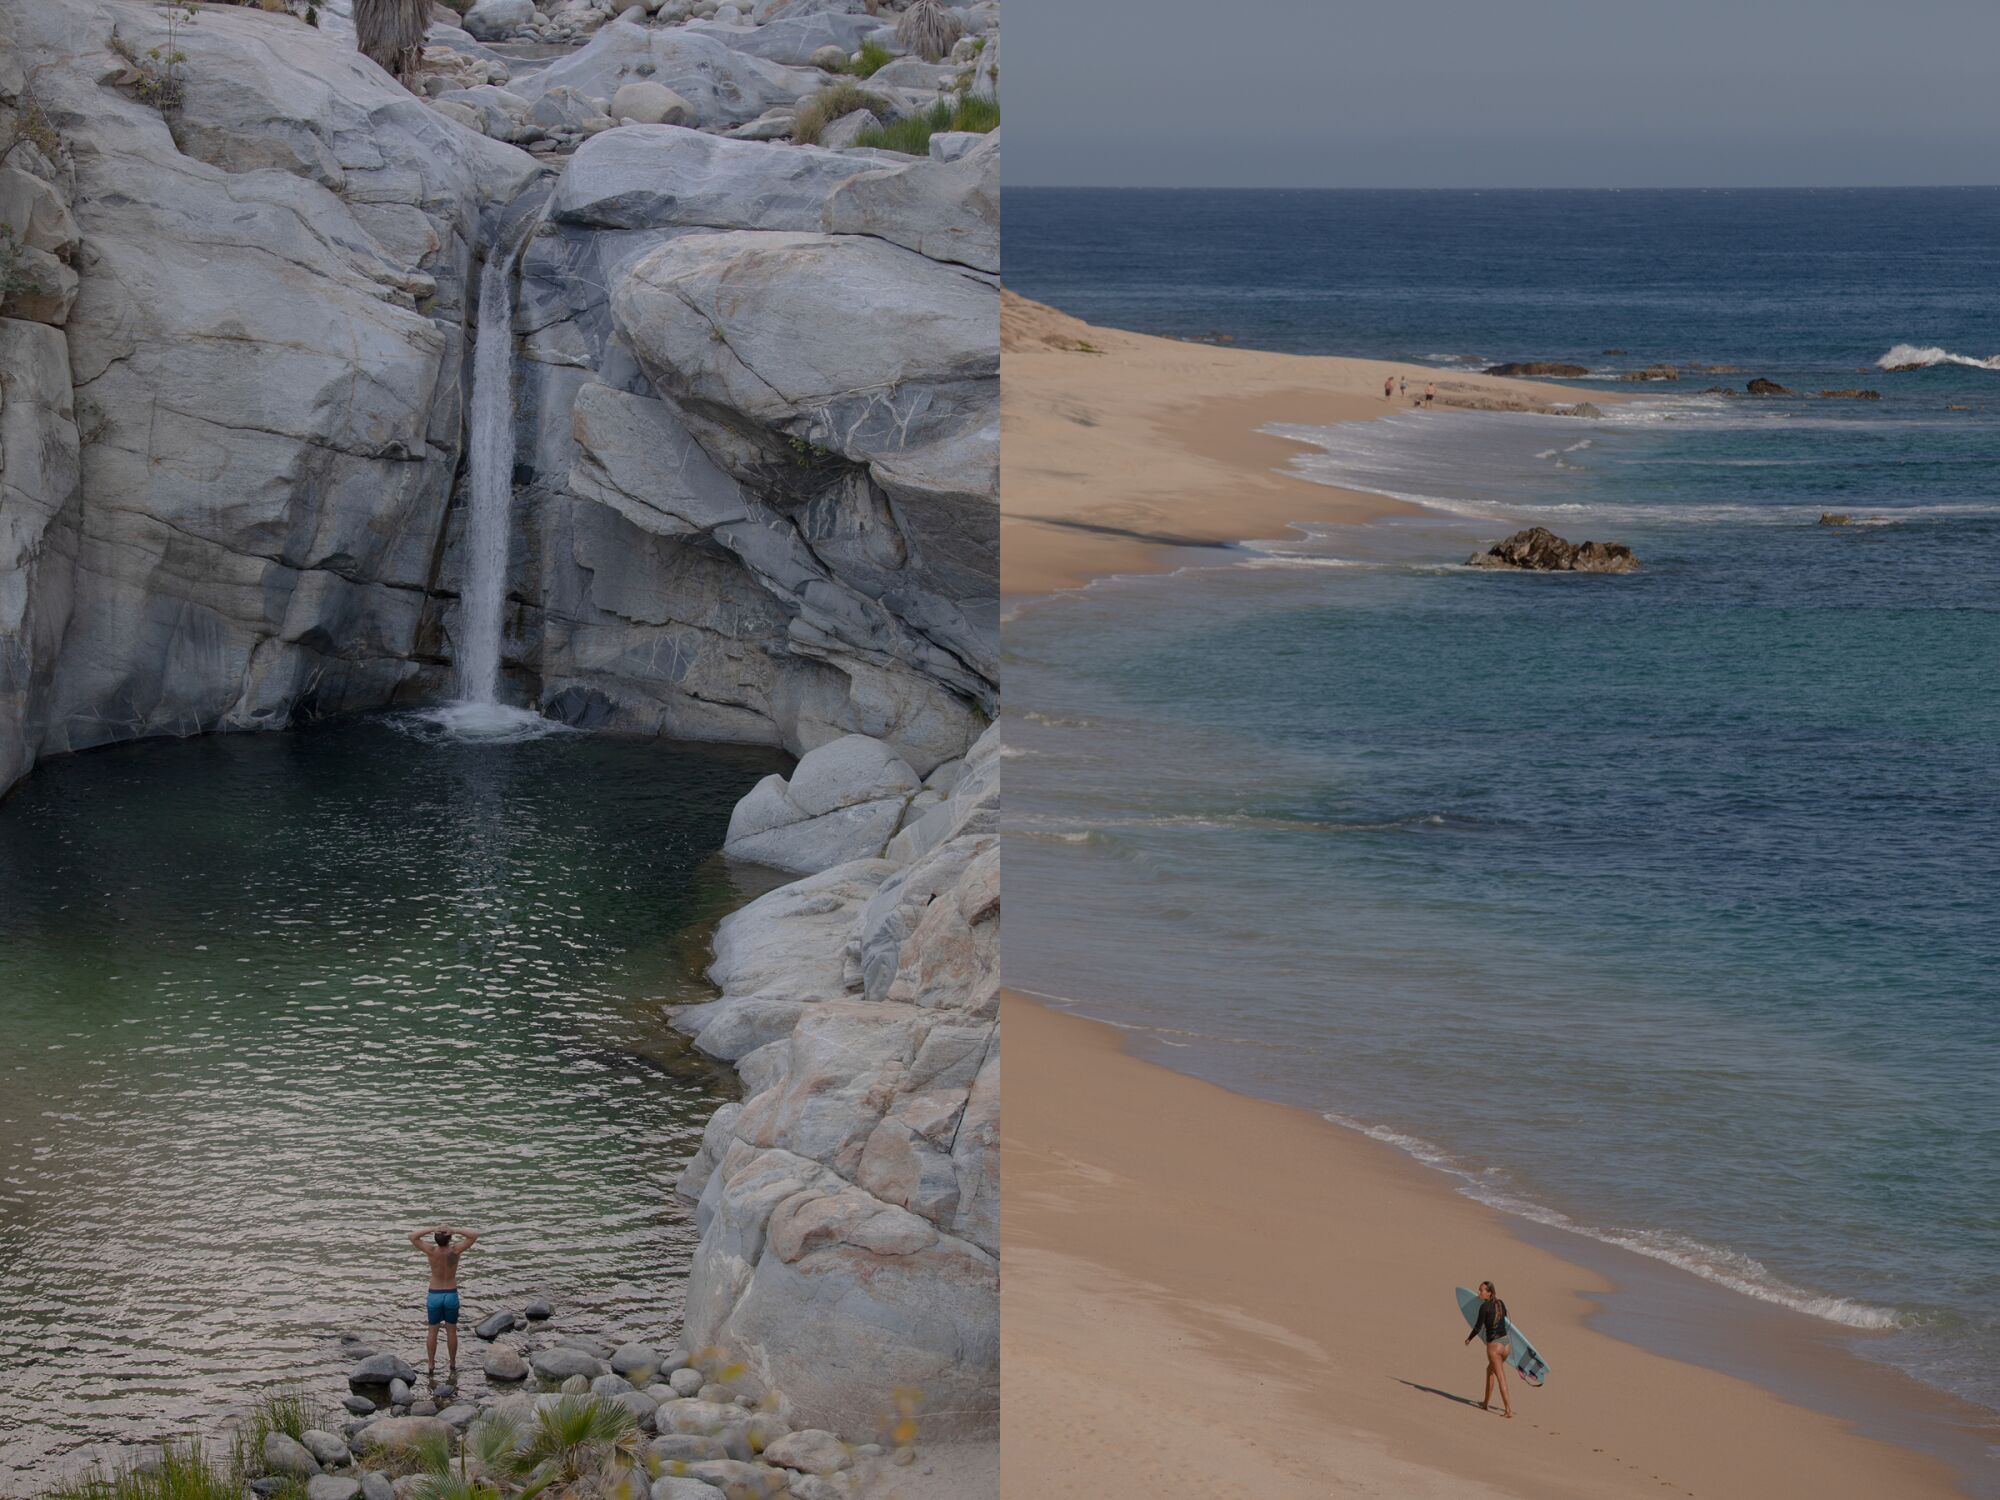 Two photos side by side showing a man at the base of a large waterfall, left, and a surfer walking along a beach, right.